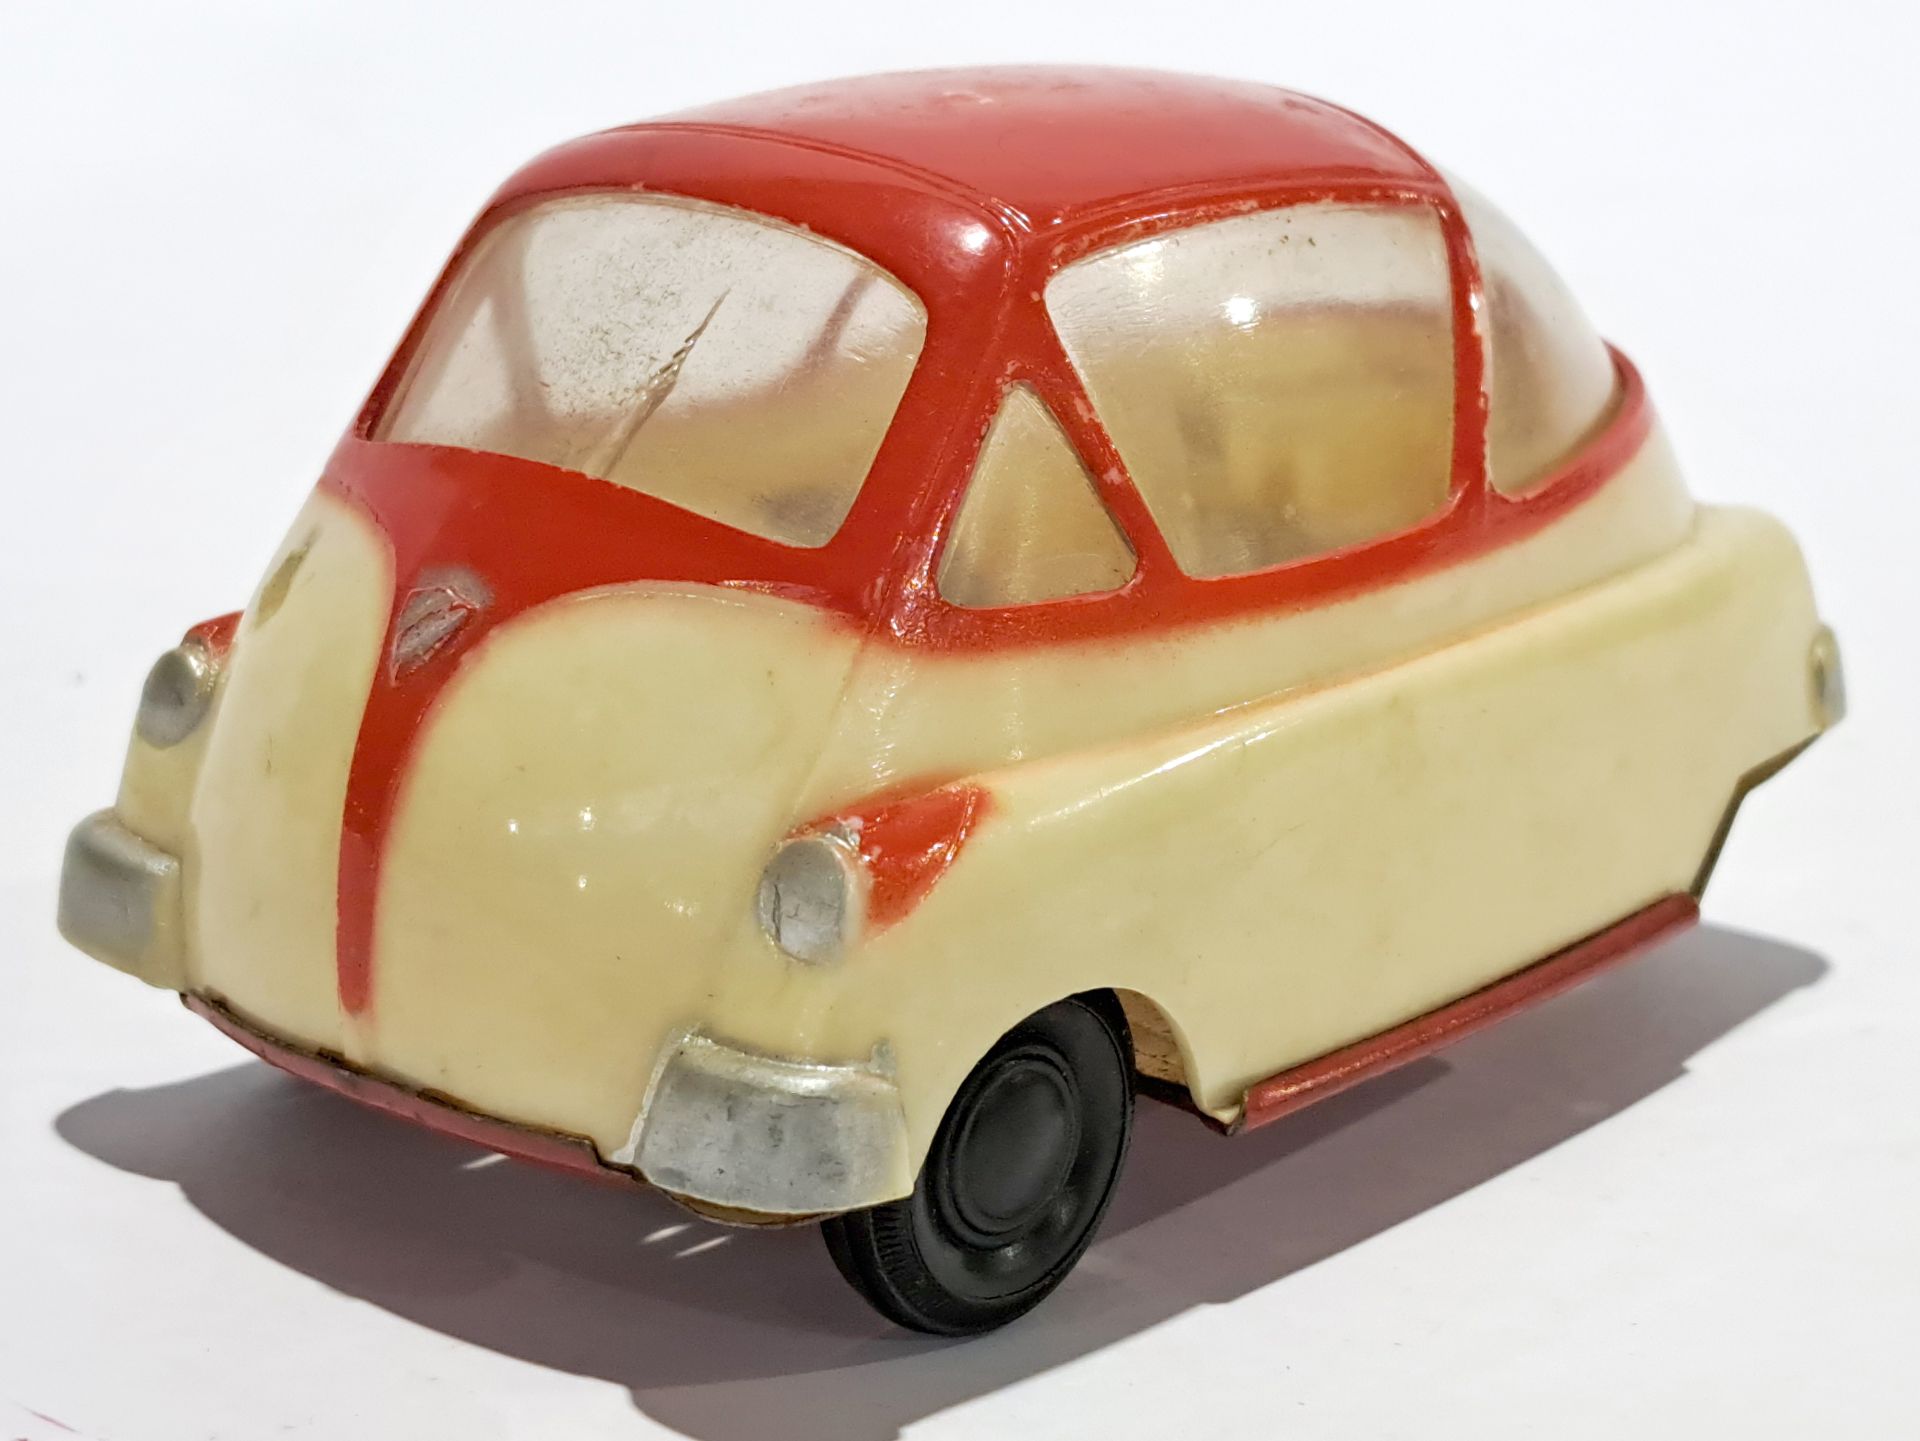 Unconfirmed maker, (possibly CH Clim Hermanos) vintage 1957 Isetta friction powered plastic car 